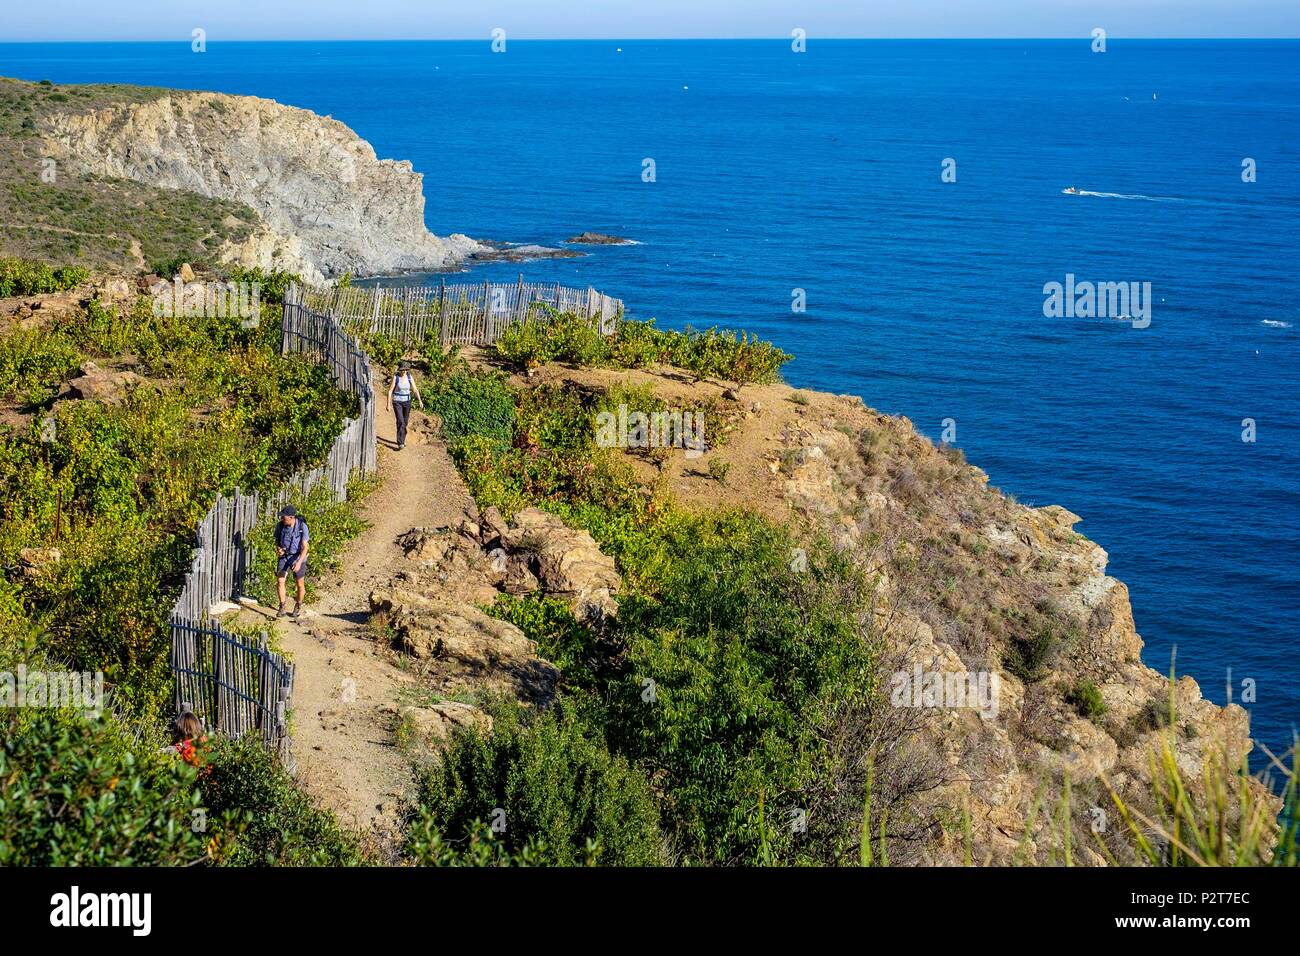 France, Pyrenees Orientales, Cote Vermeille, hiking from Banyuls sur Mer to Cerbere on the coastal path, Cap de l'Abeille Stock Photo